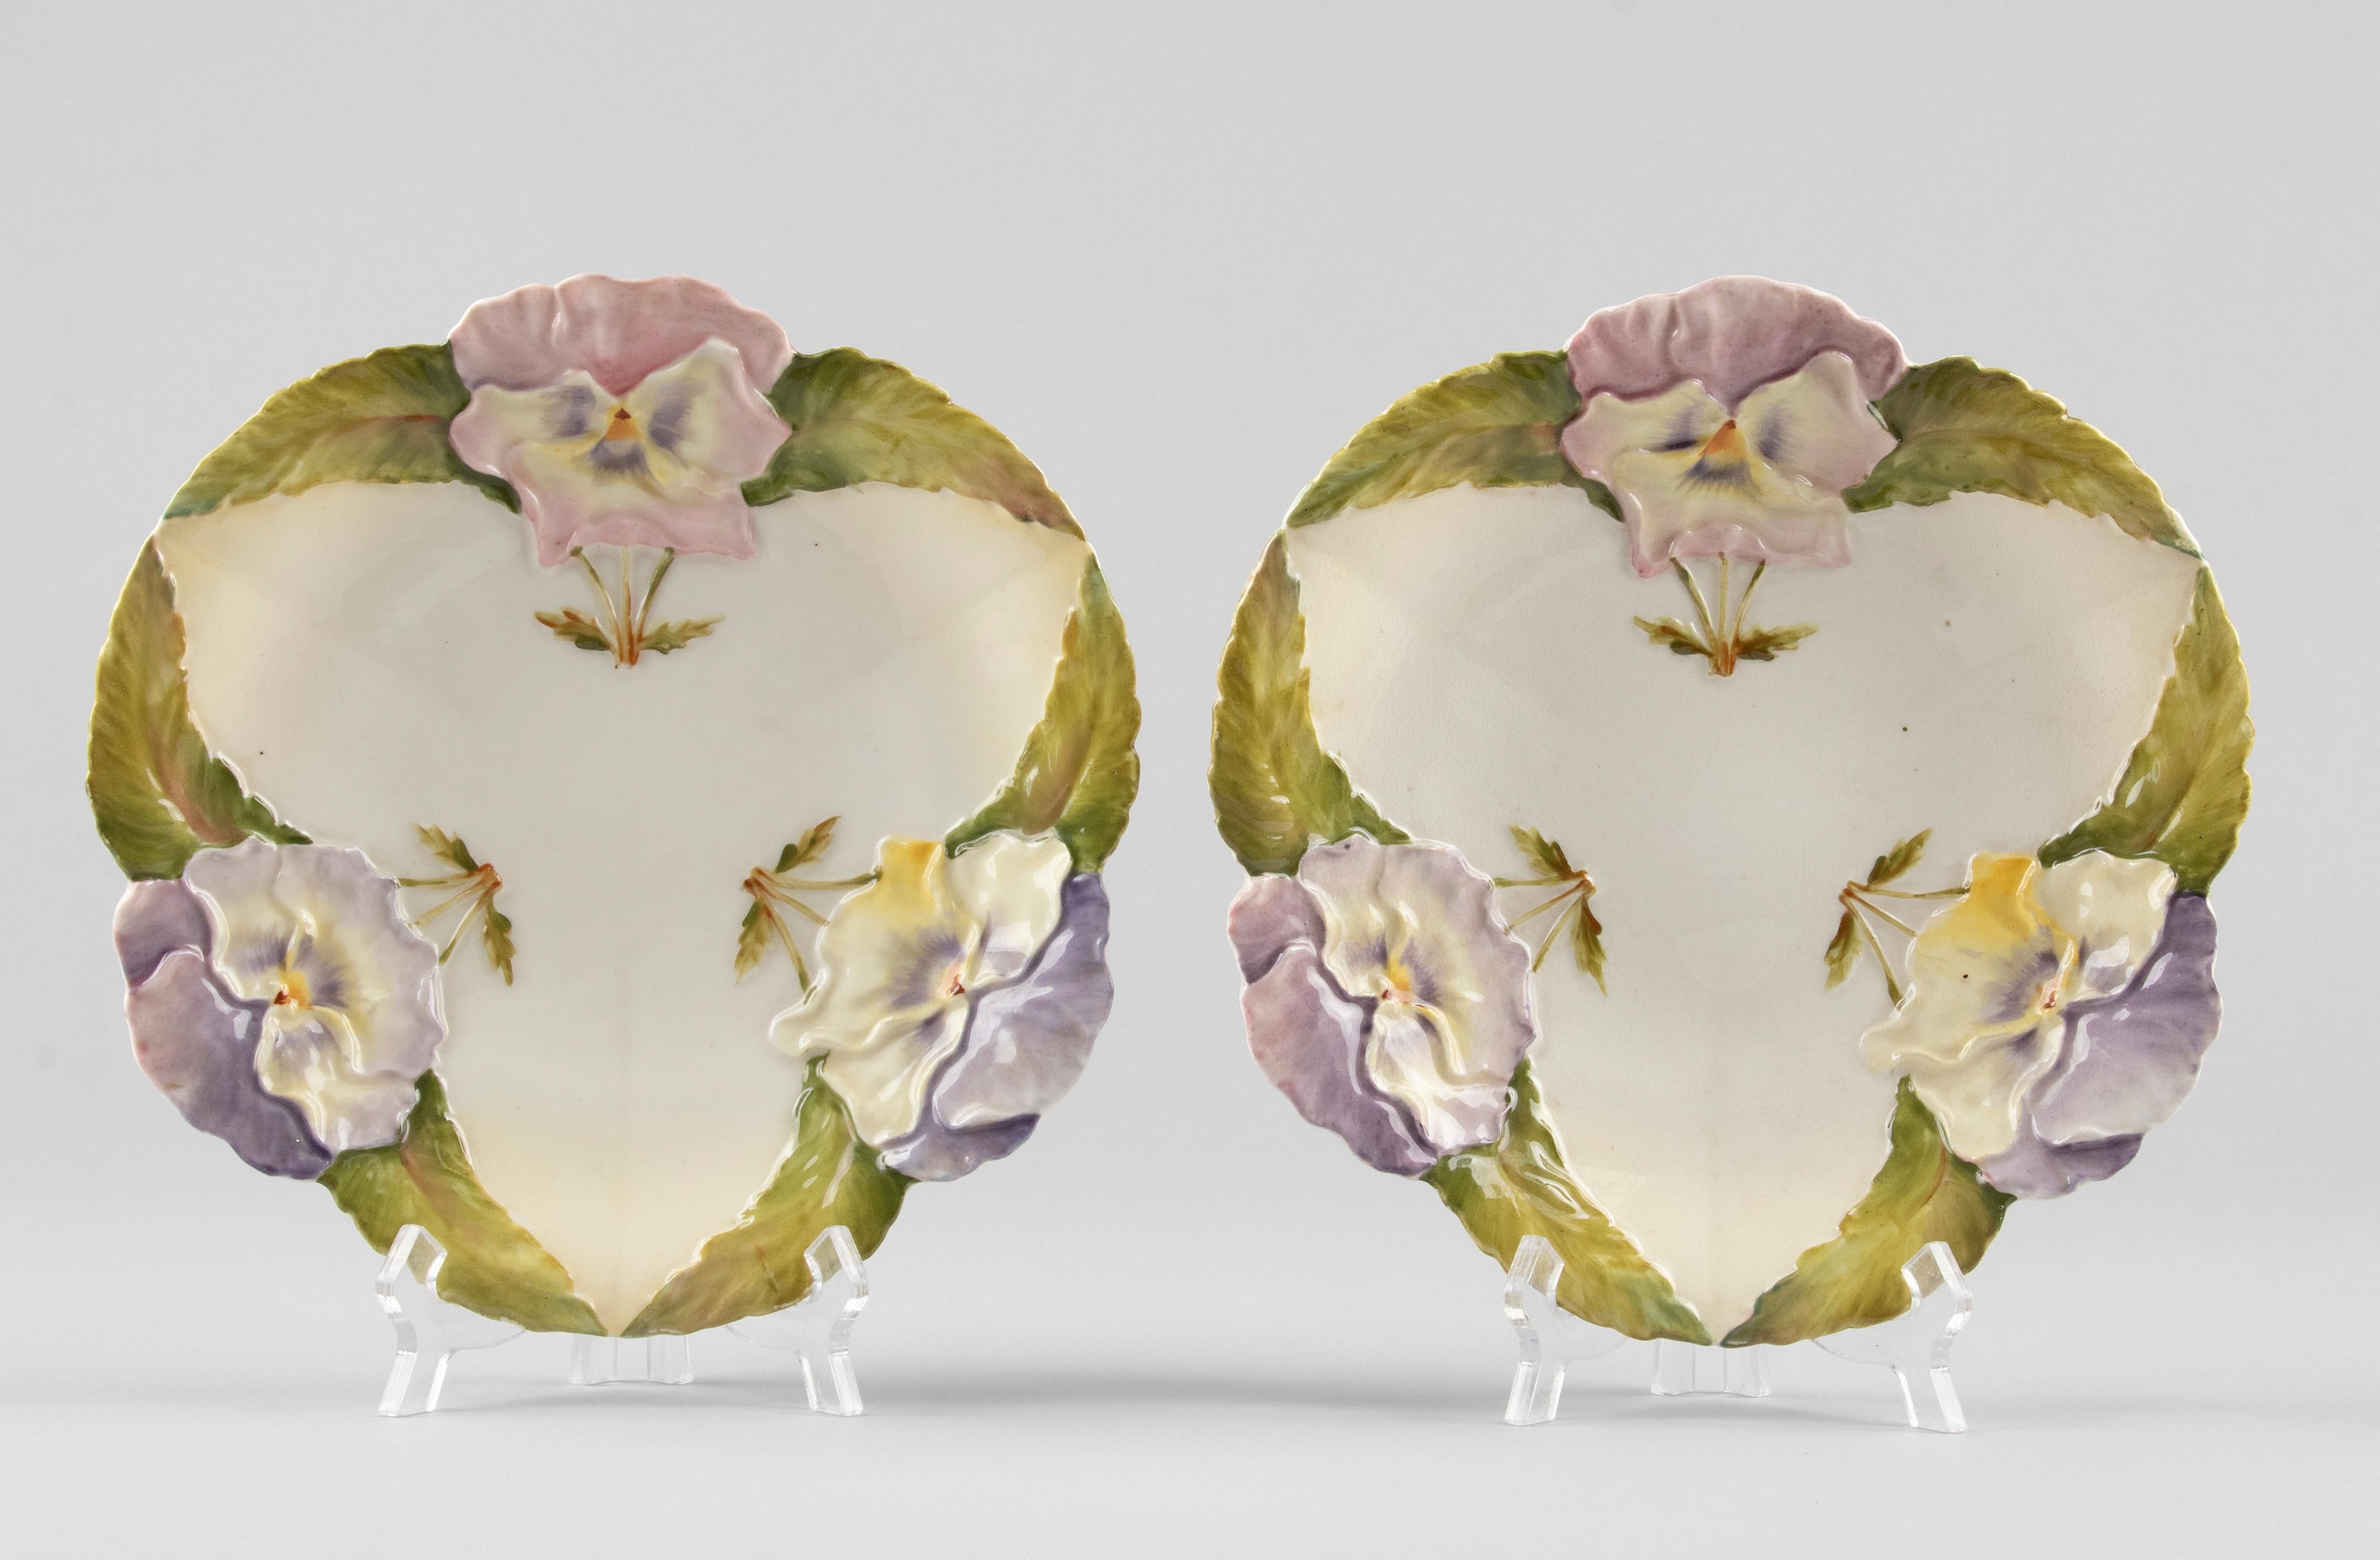 Hand-Crafted Pair of 19th Century Majolica Plates Decorated with Flowers For Sale